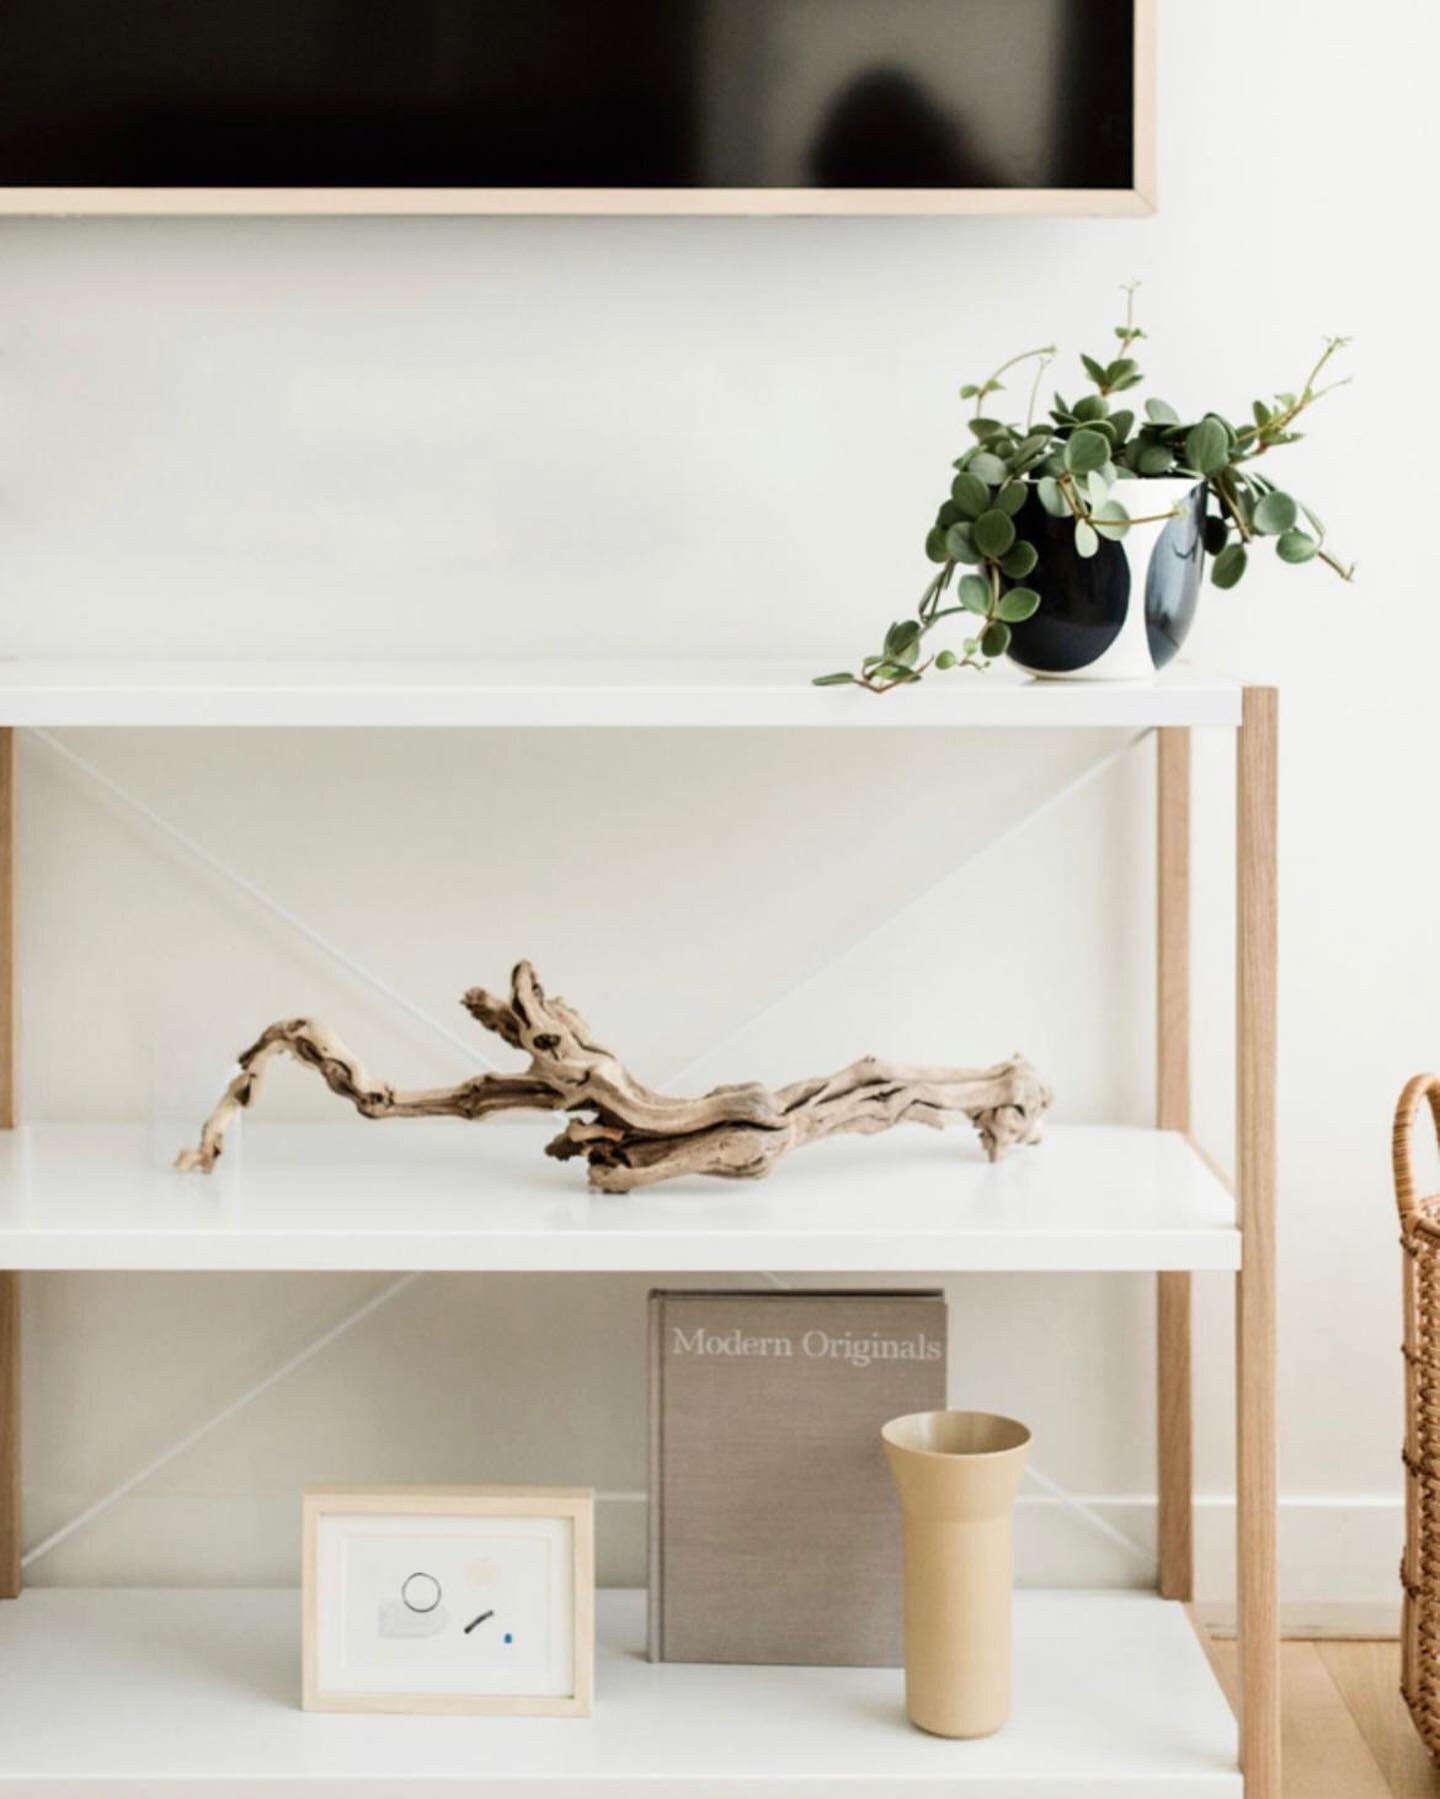 Not all #shelfies are equal ▫️▫️

Styling shelves can be tough▫️ Keeping it simple but precisely layering materials + objects works wonders ▫️Less can definitely be more!

We recommend thinking outside of the box &amp; mixing new items with personal 